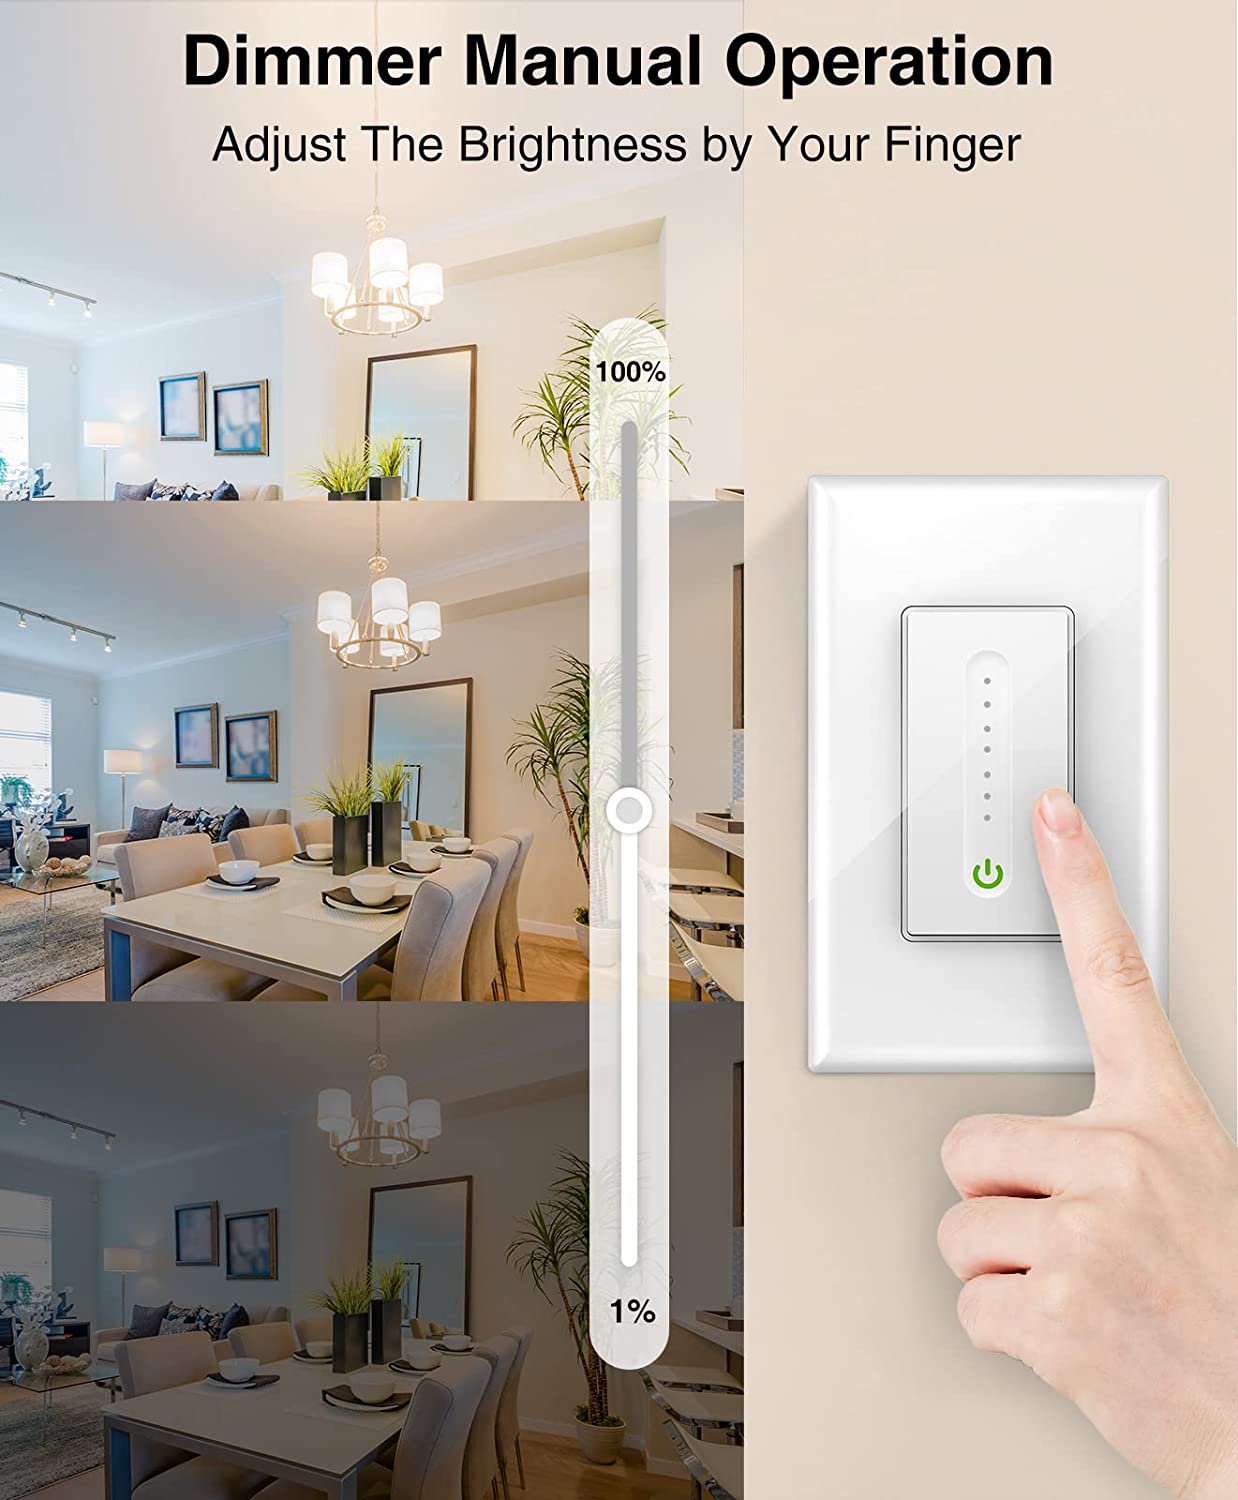 GHome Smart Smart Dimmer Switch Work with Alexa Google Home, Neutral Wire Required 2.4GHz Wi-Fi Switch for Dimming LED CFL INC Light Bulbs, Single Pole, UL Certified, No Hub Required, 4Pack